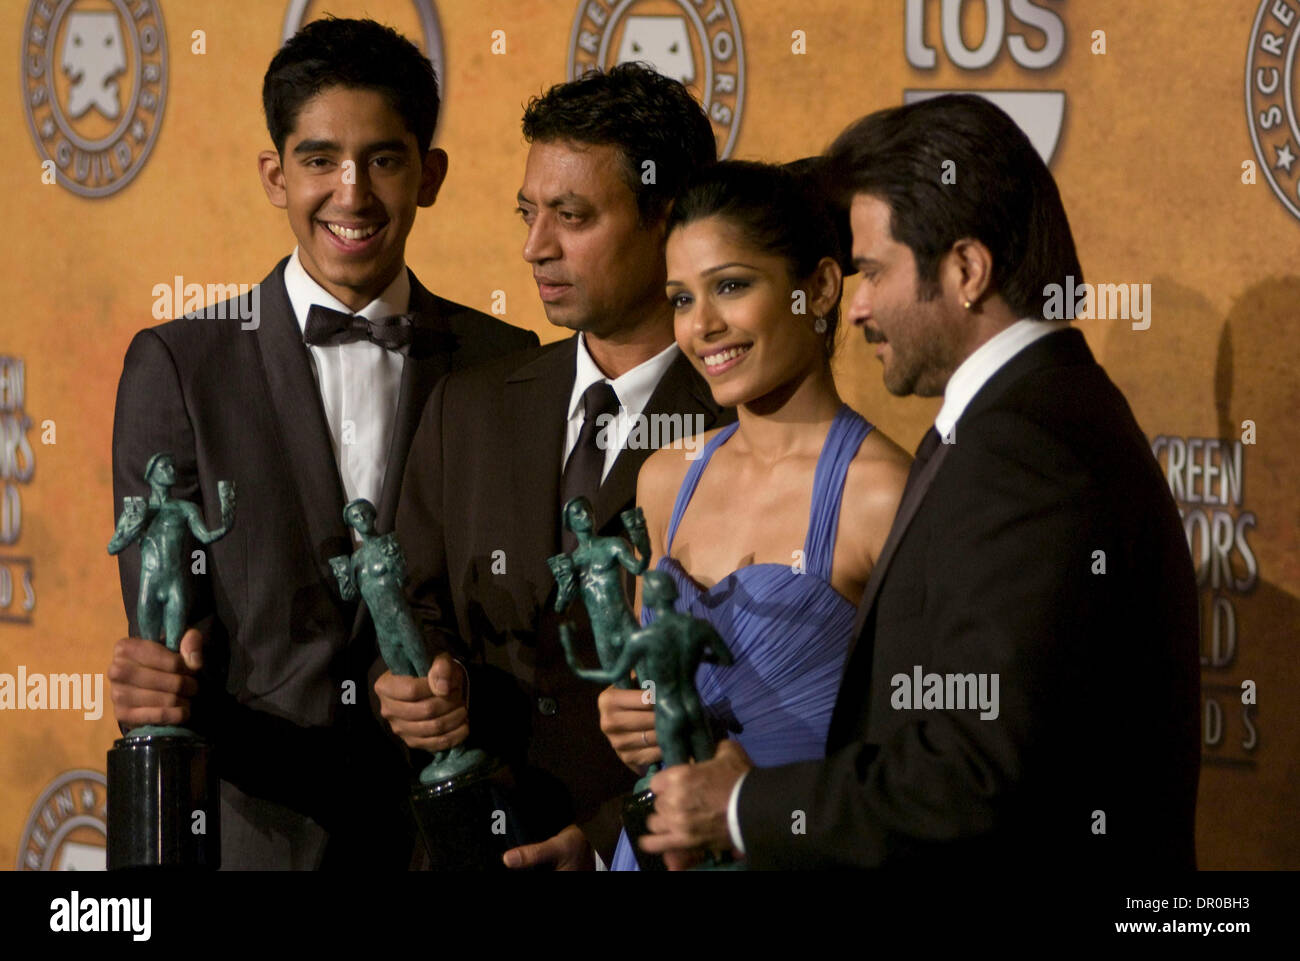 Jan 25, 2009 - Los Angeles, California, USA - Cast of 'Slumdog Millionaire' with the award for 'Outstanding Performance by a Cast in a Motion Picture' for 'Slumdog Millionaire' in the pressroom at the 15th Annual Screen Actors Guild Awards at the Shrine Auditorium in Los Angeles. (Credit Image: © Leopolda Pena/ZUMA Press) Stock Photo